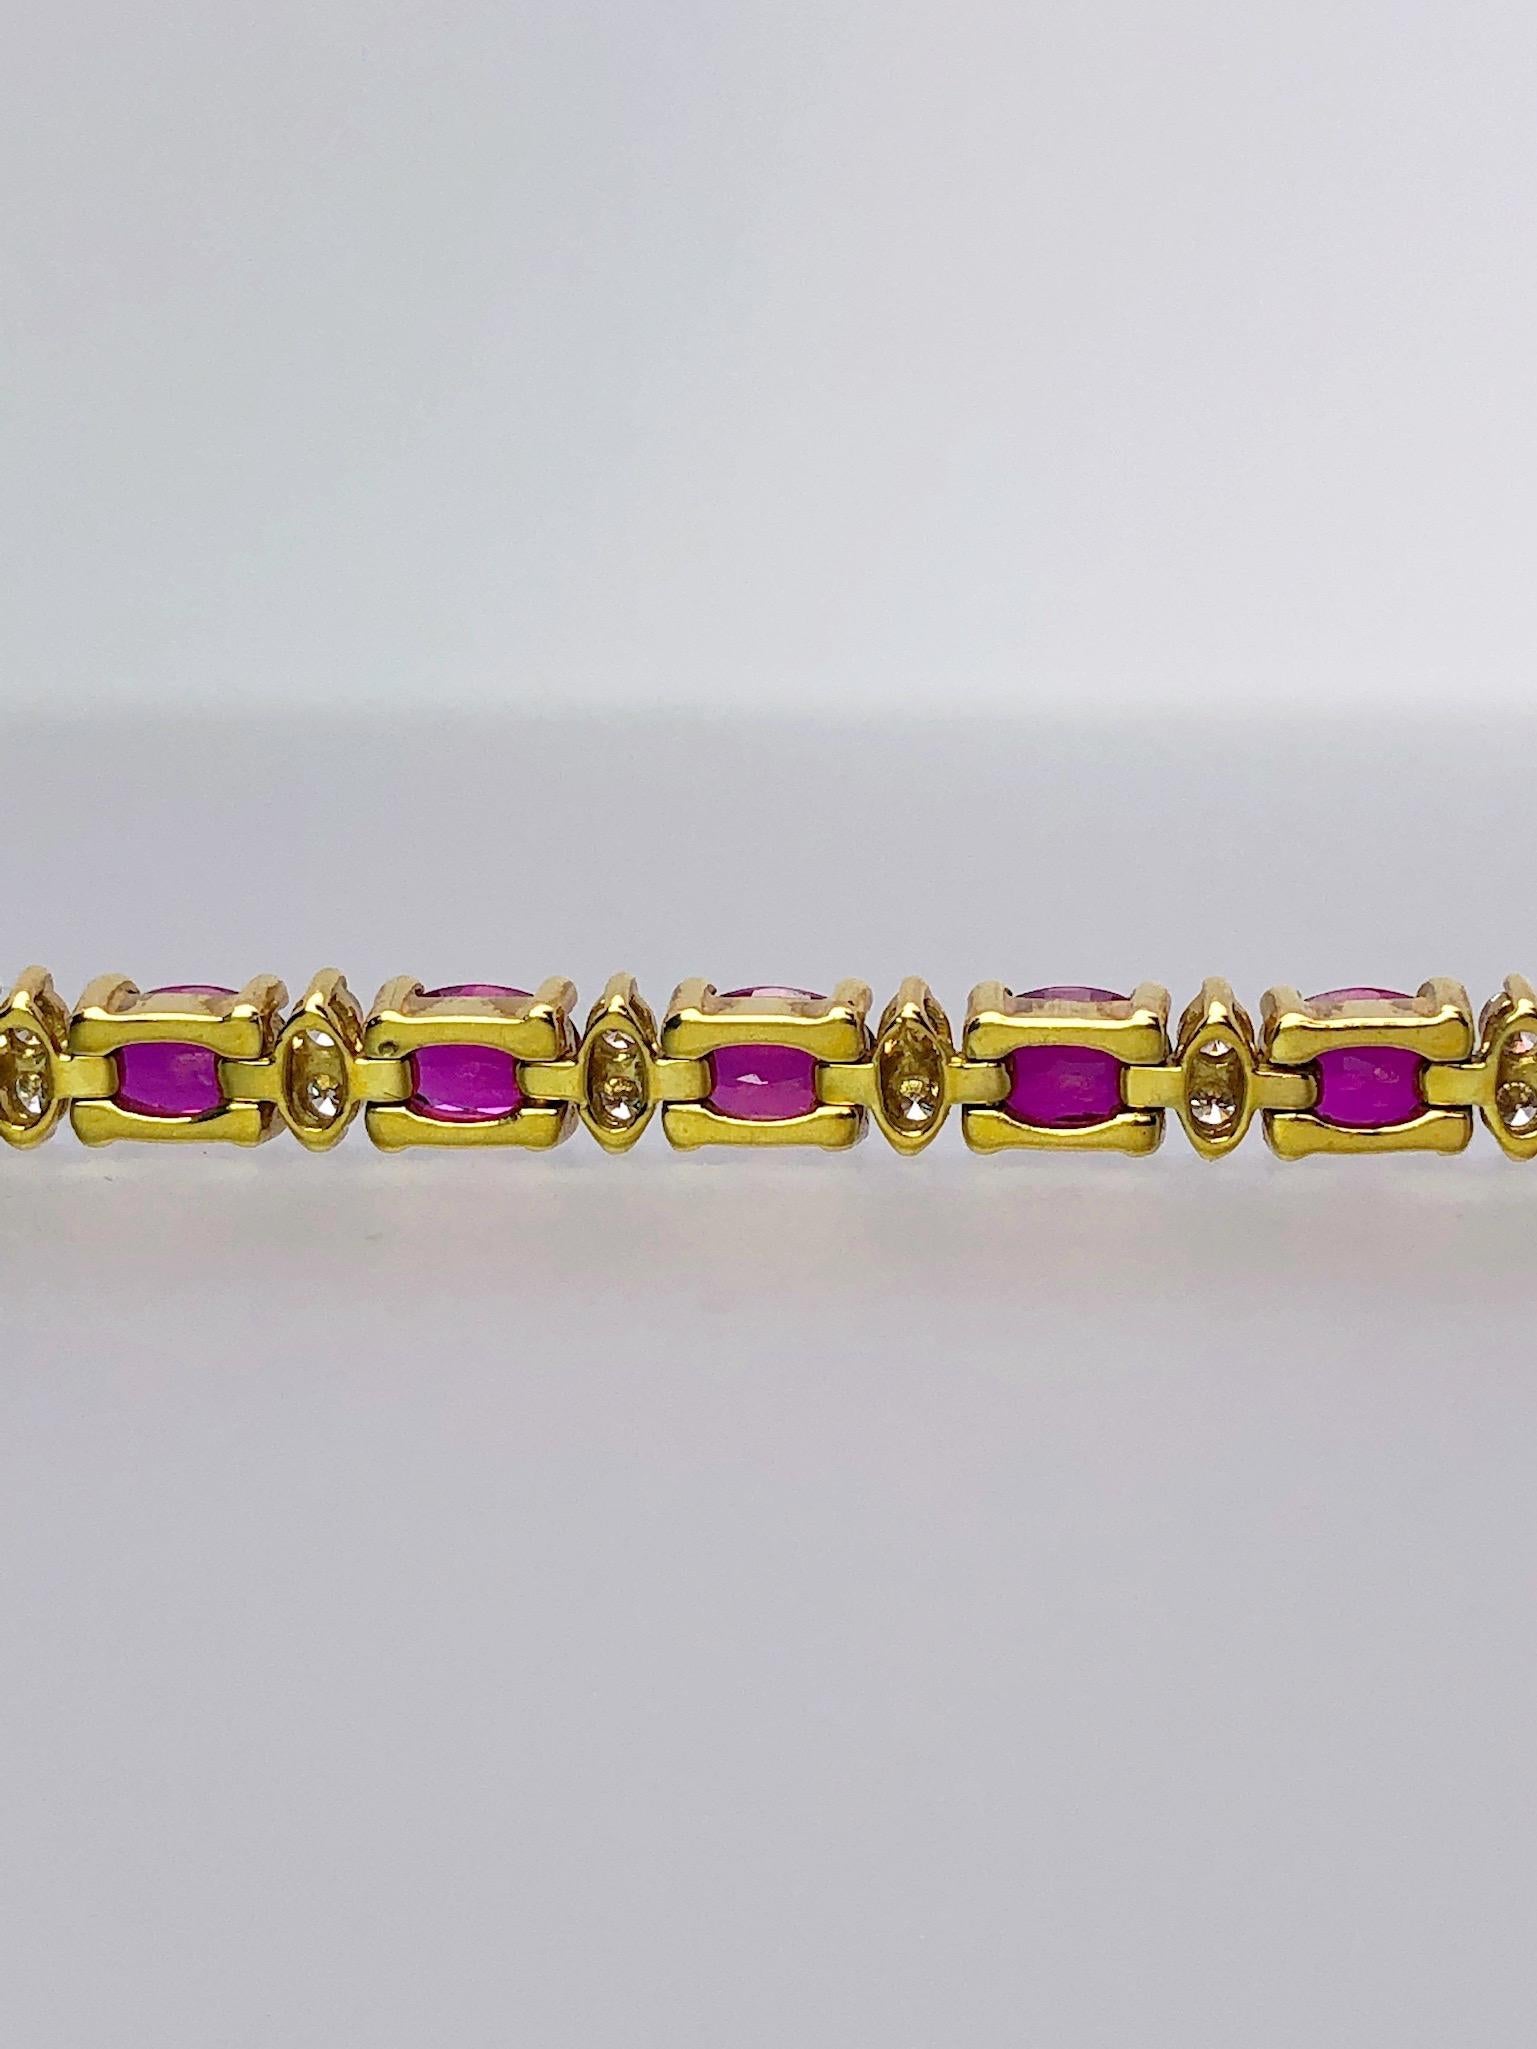 Contemporary Cellini 18KT Yellow Gold, 11.36 Carat Oval Ruby and 1.10 Carat Diamond Bracelet For Sale